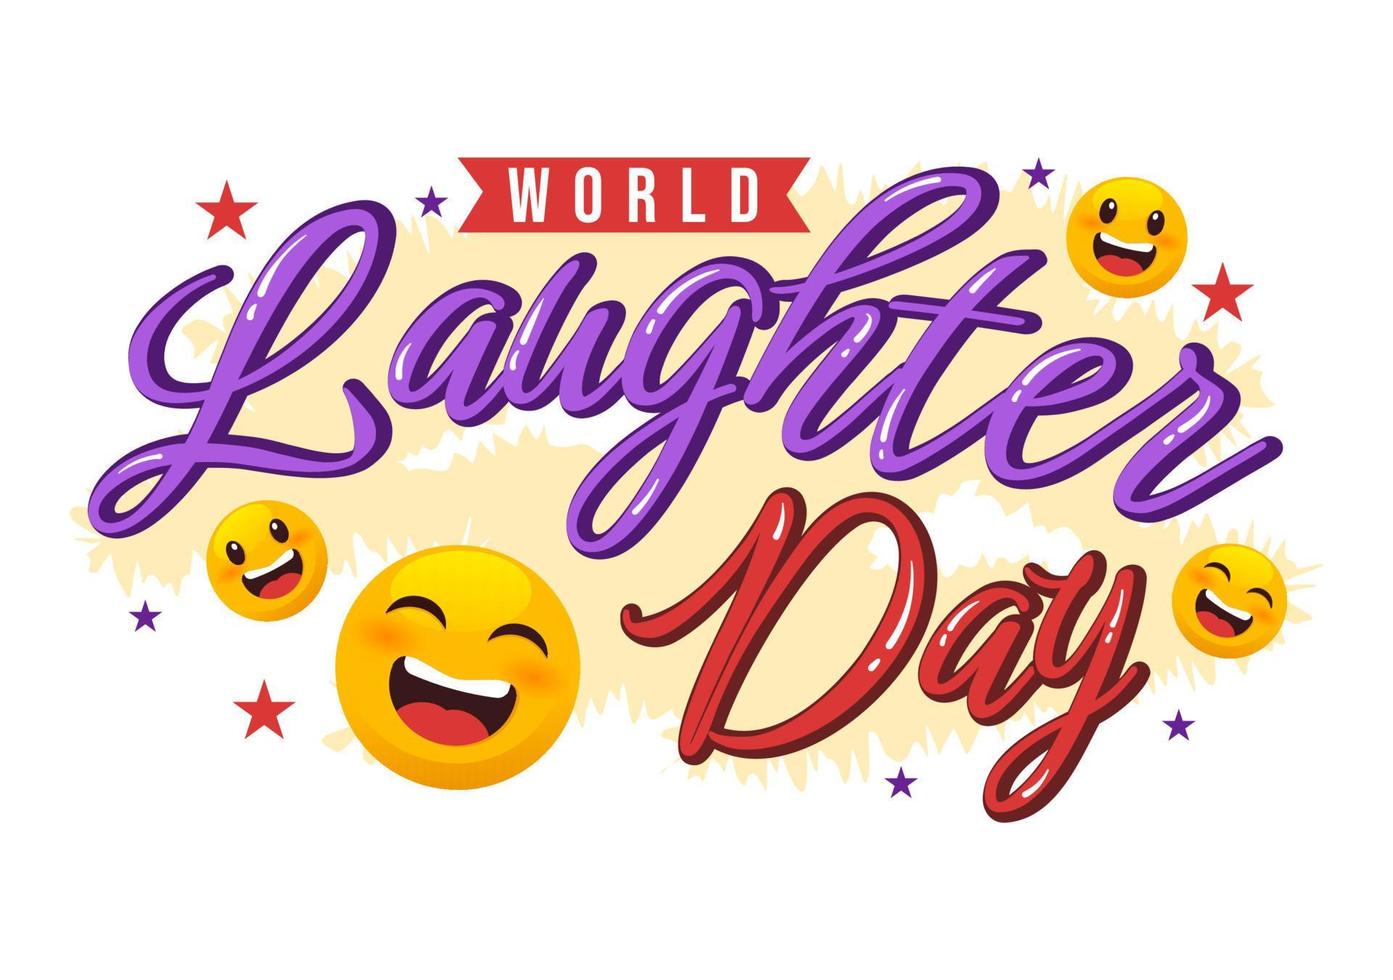 World Laughter Day Illustration with Smiley Facial Expression Cute for Web Banner or Landing Page in Flat Cartoon Hand Drawn Templates vector